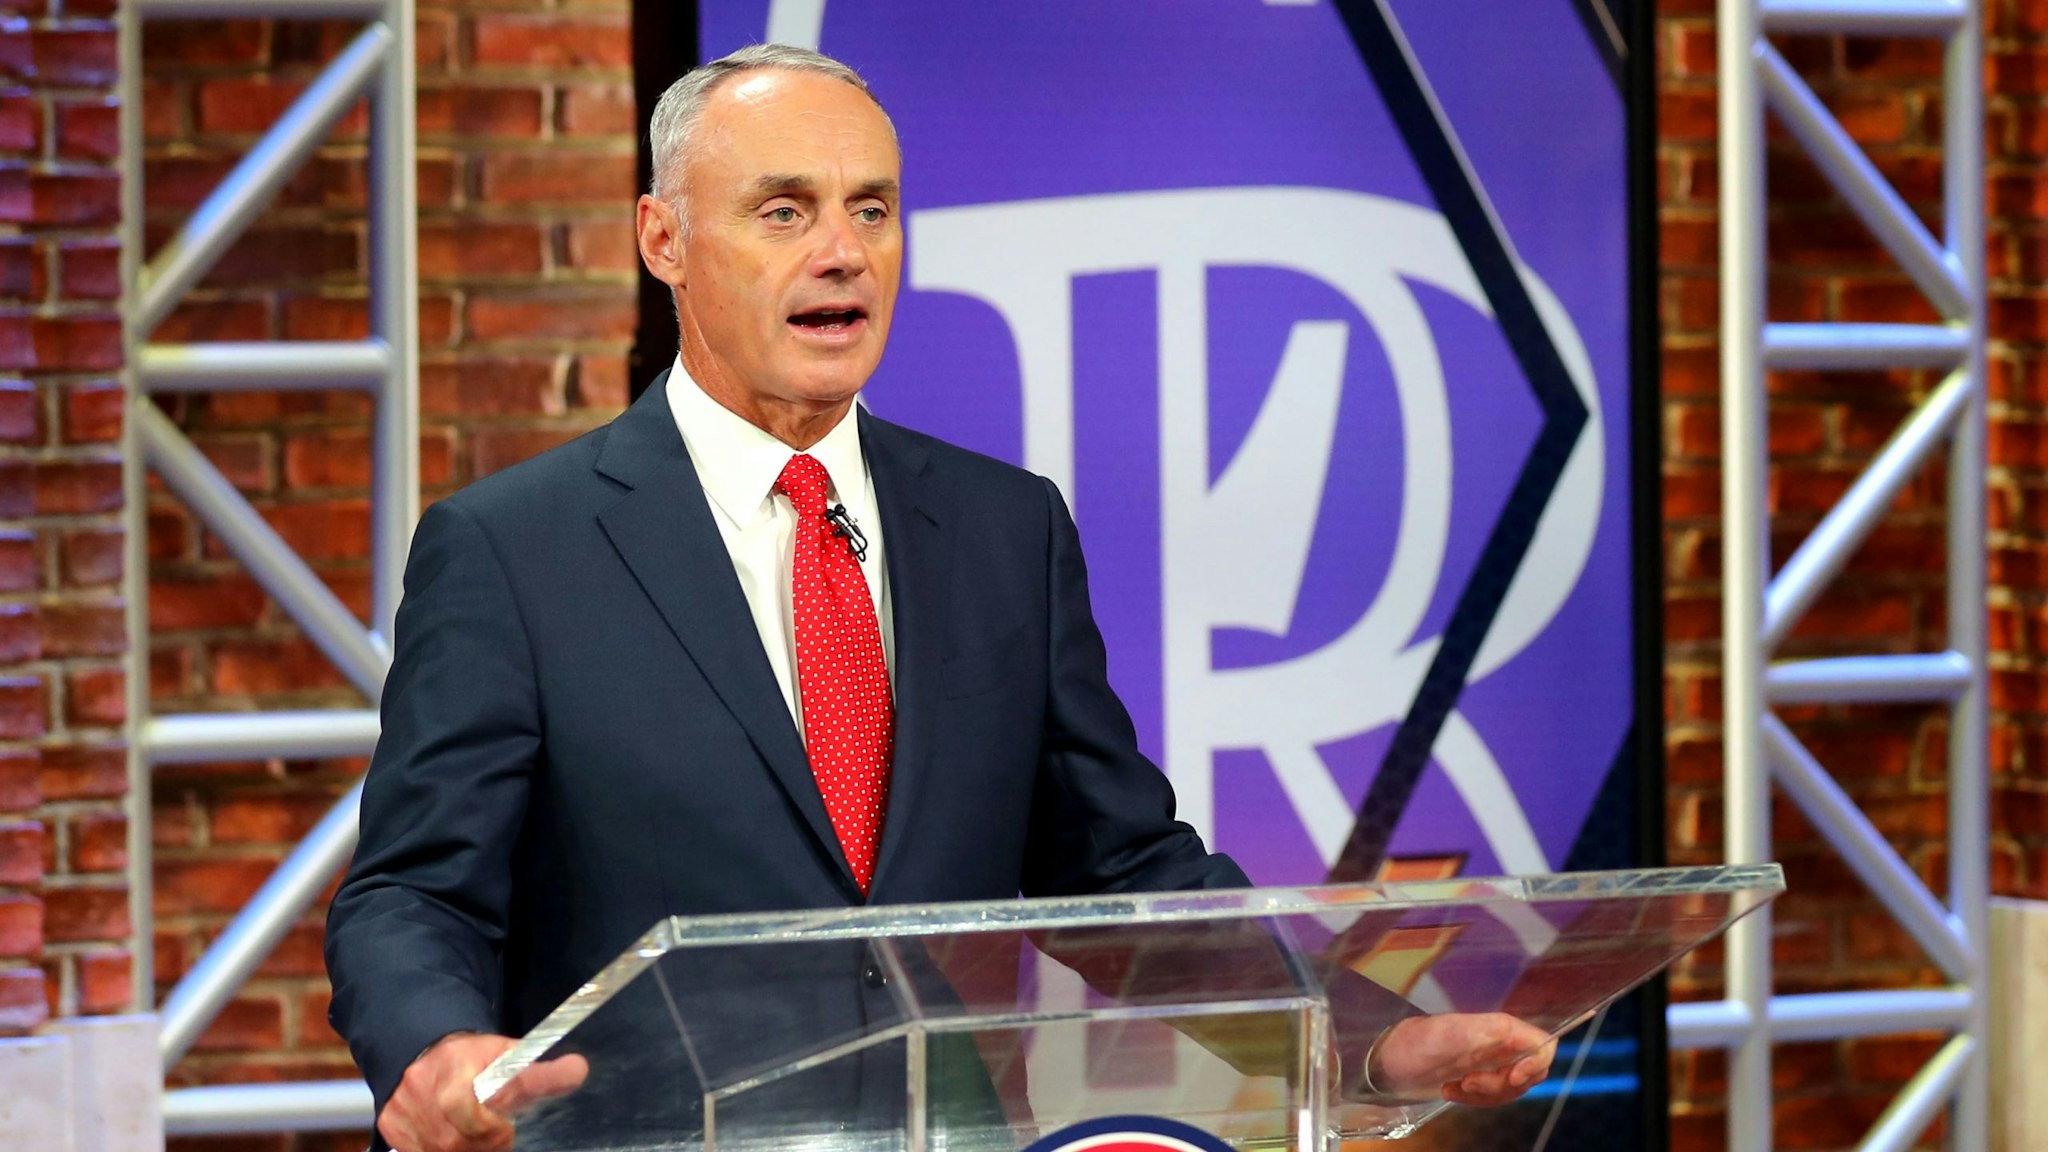 SECAUCUS, NJ - JUNE 10: Major League Baseball Commissioner Robert D. Manfred Jr. announces the ninth pick of the 2020 MLB Draft is Zac Veen by the Colorado Rockies during the 2020 Major League Baseball Draft at MLB Network on Wednesday, June 10, 2020 in Secaucus, New Jersey.